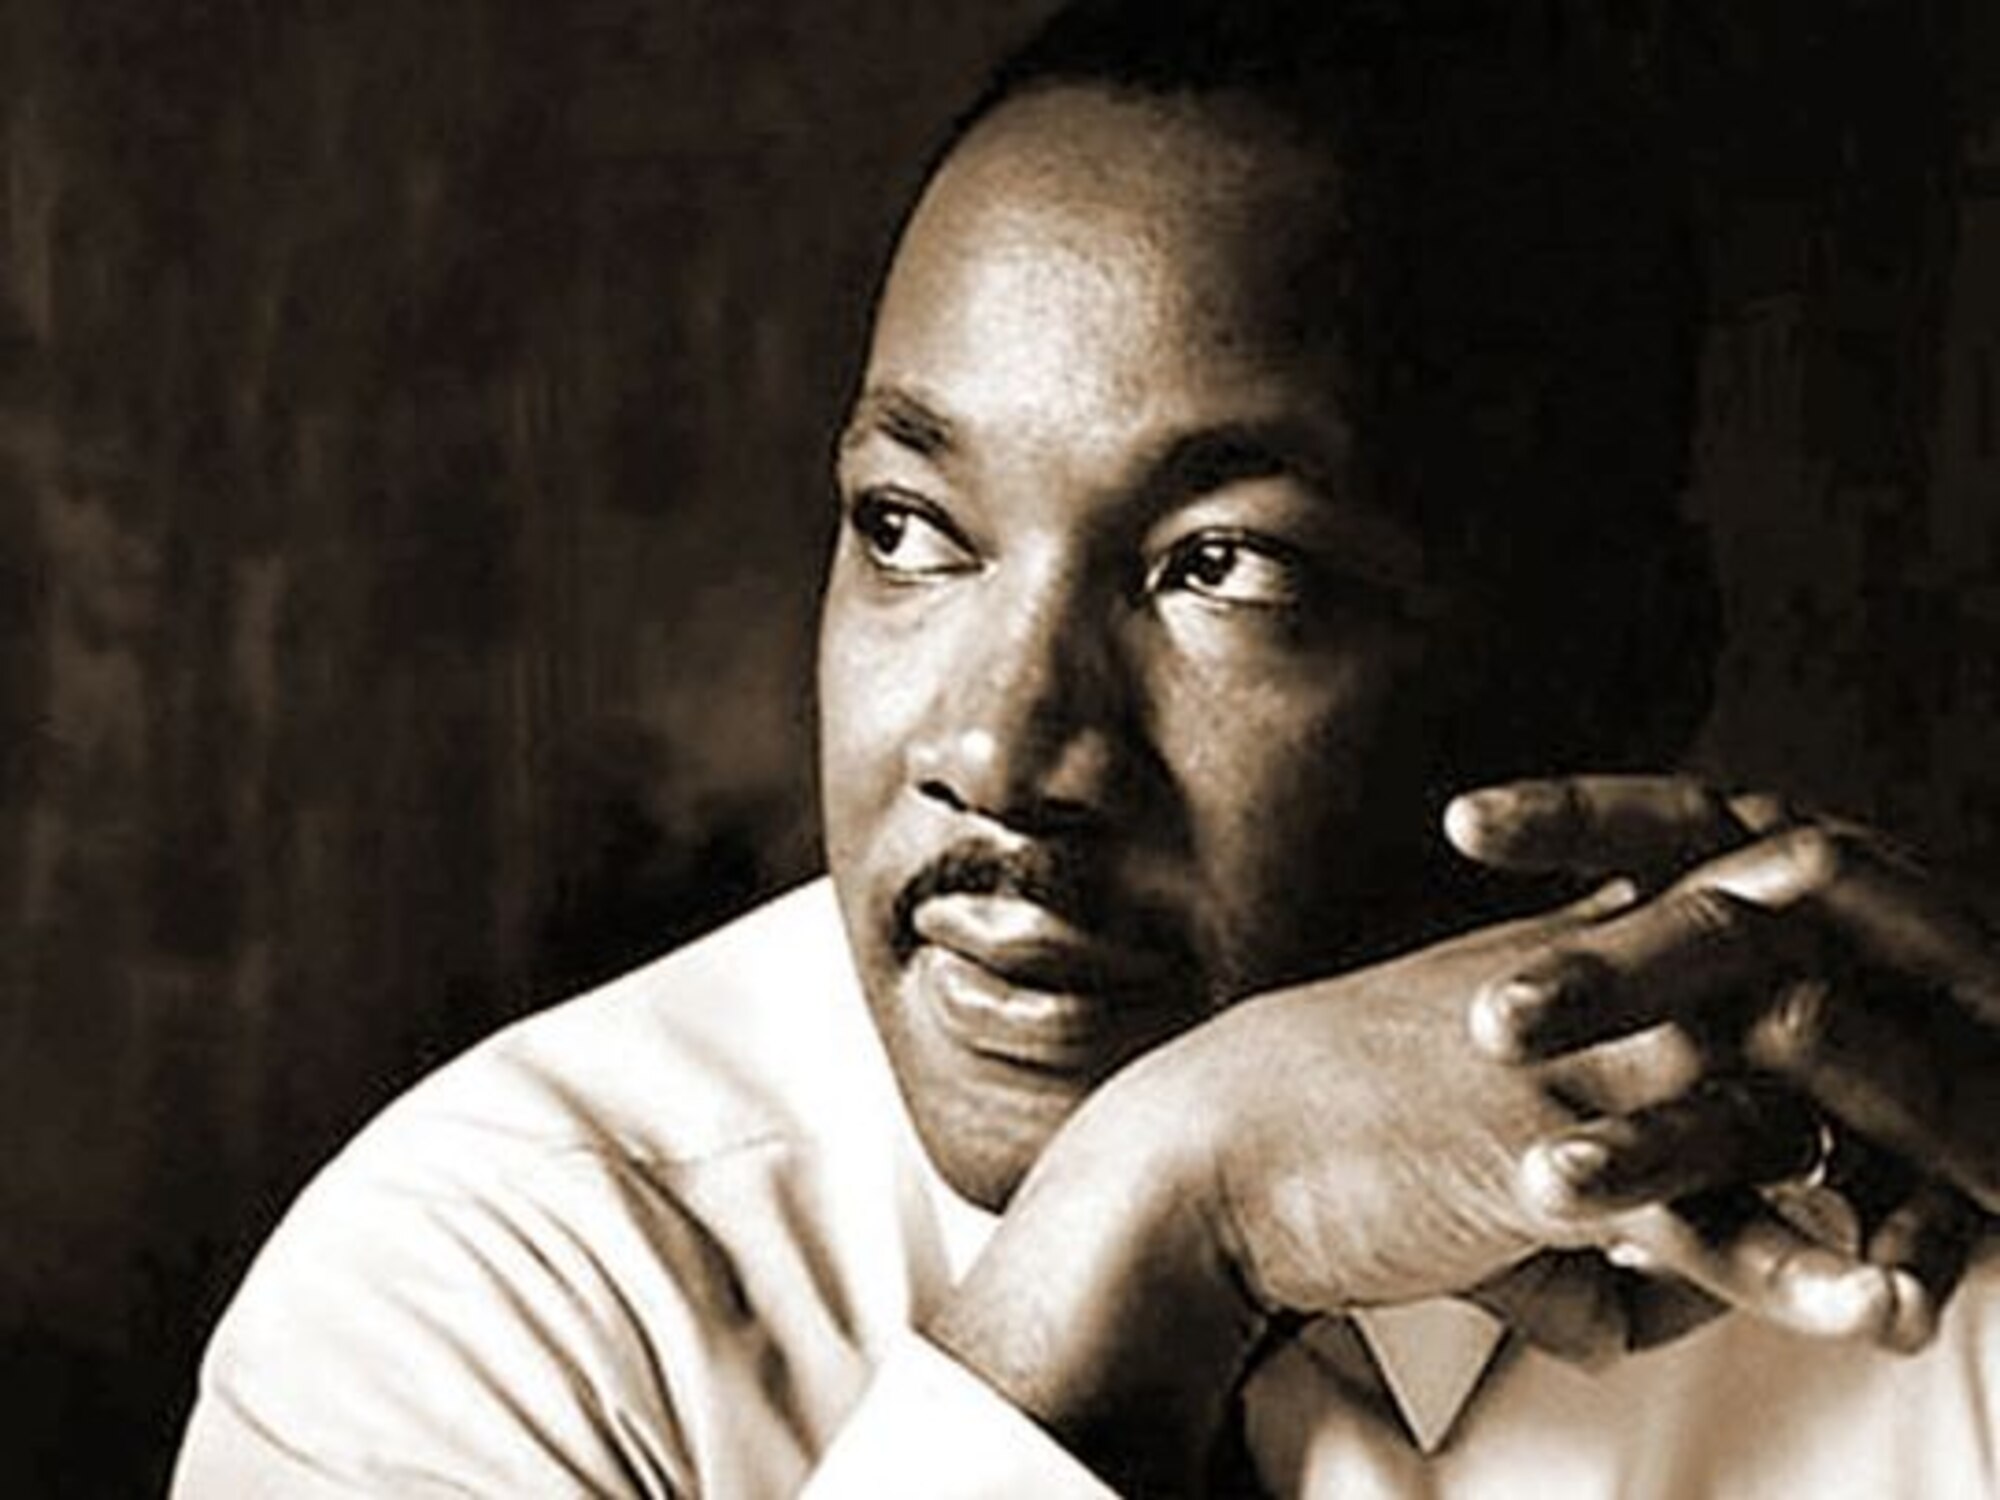 To celebrate and recognize the significant achievements made by an individual or organization at Wright-Patterson AFB, nominations are now being accepted for the 2020 Rev. Dr. Martin Luther King Jr. Humanitarian Awards. Winners will be recognized at the annual Dr. Martin Luther King, Jr. awards luncheon on January 17, 2020. (Courtesy photo)